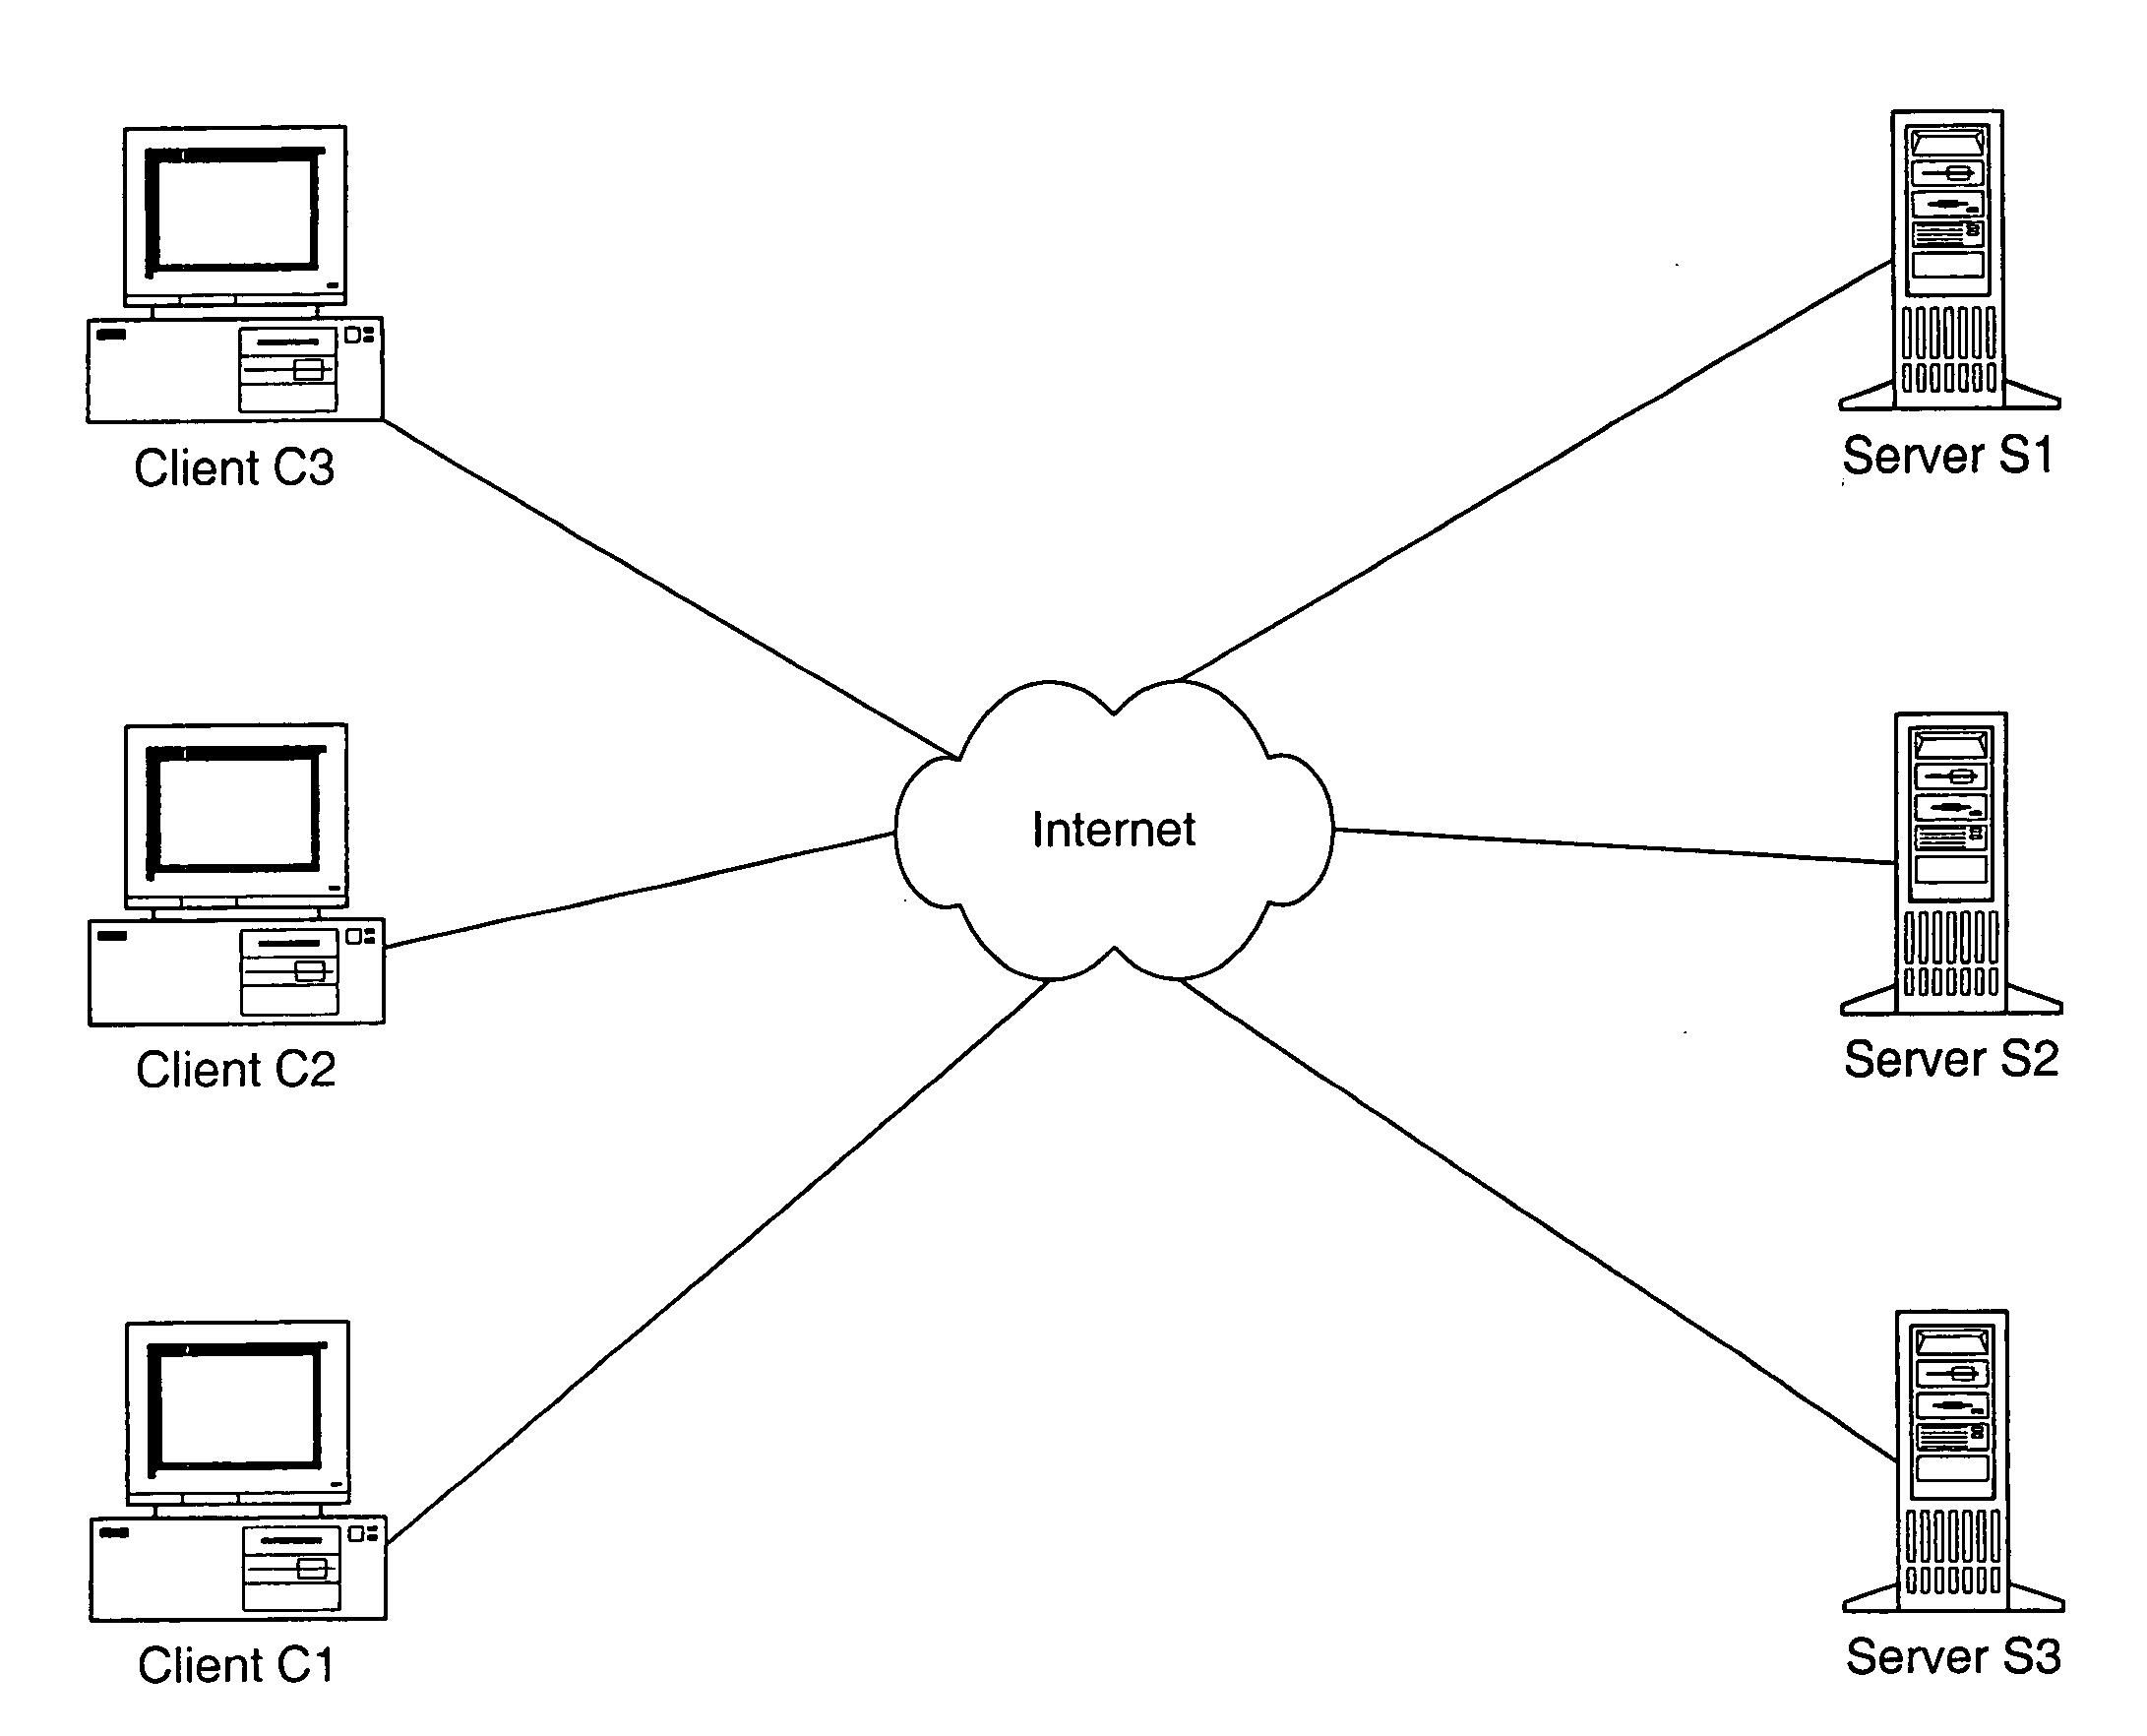 System, method and computer program product for providing unified authentication services for online applications